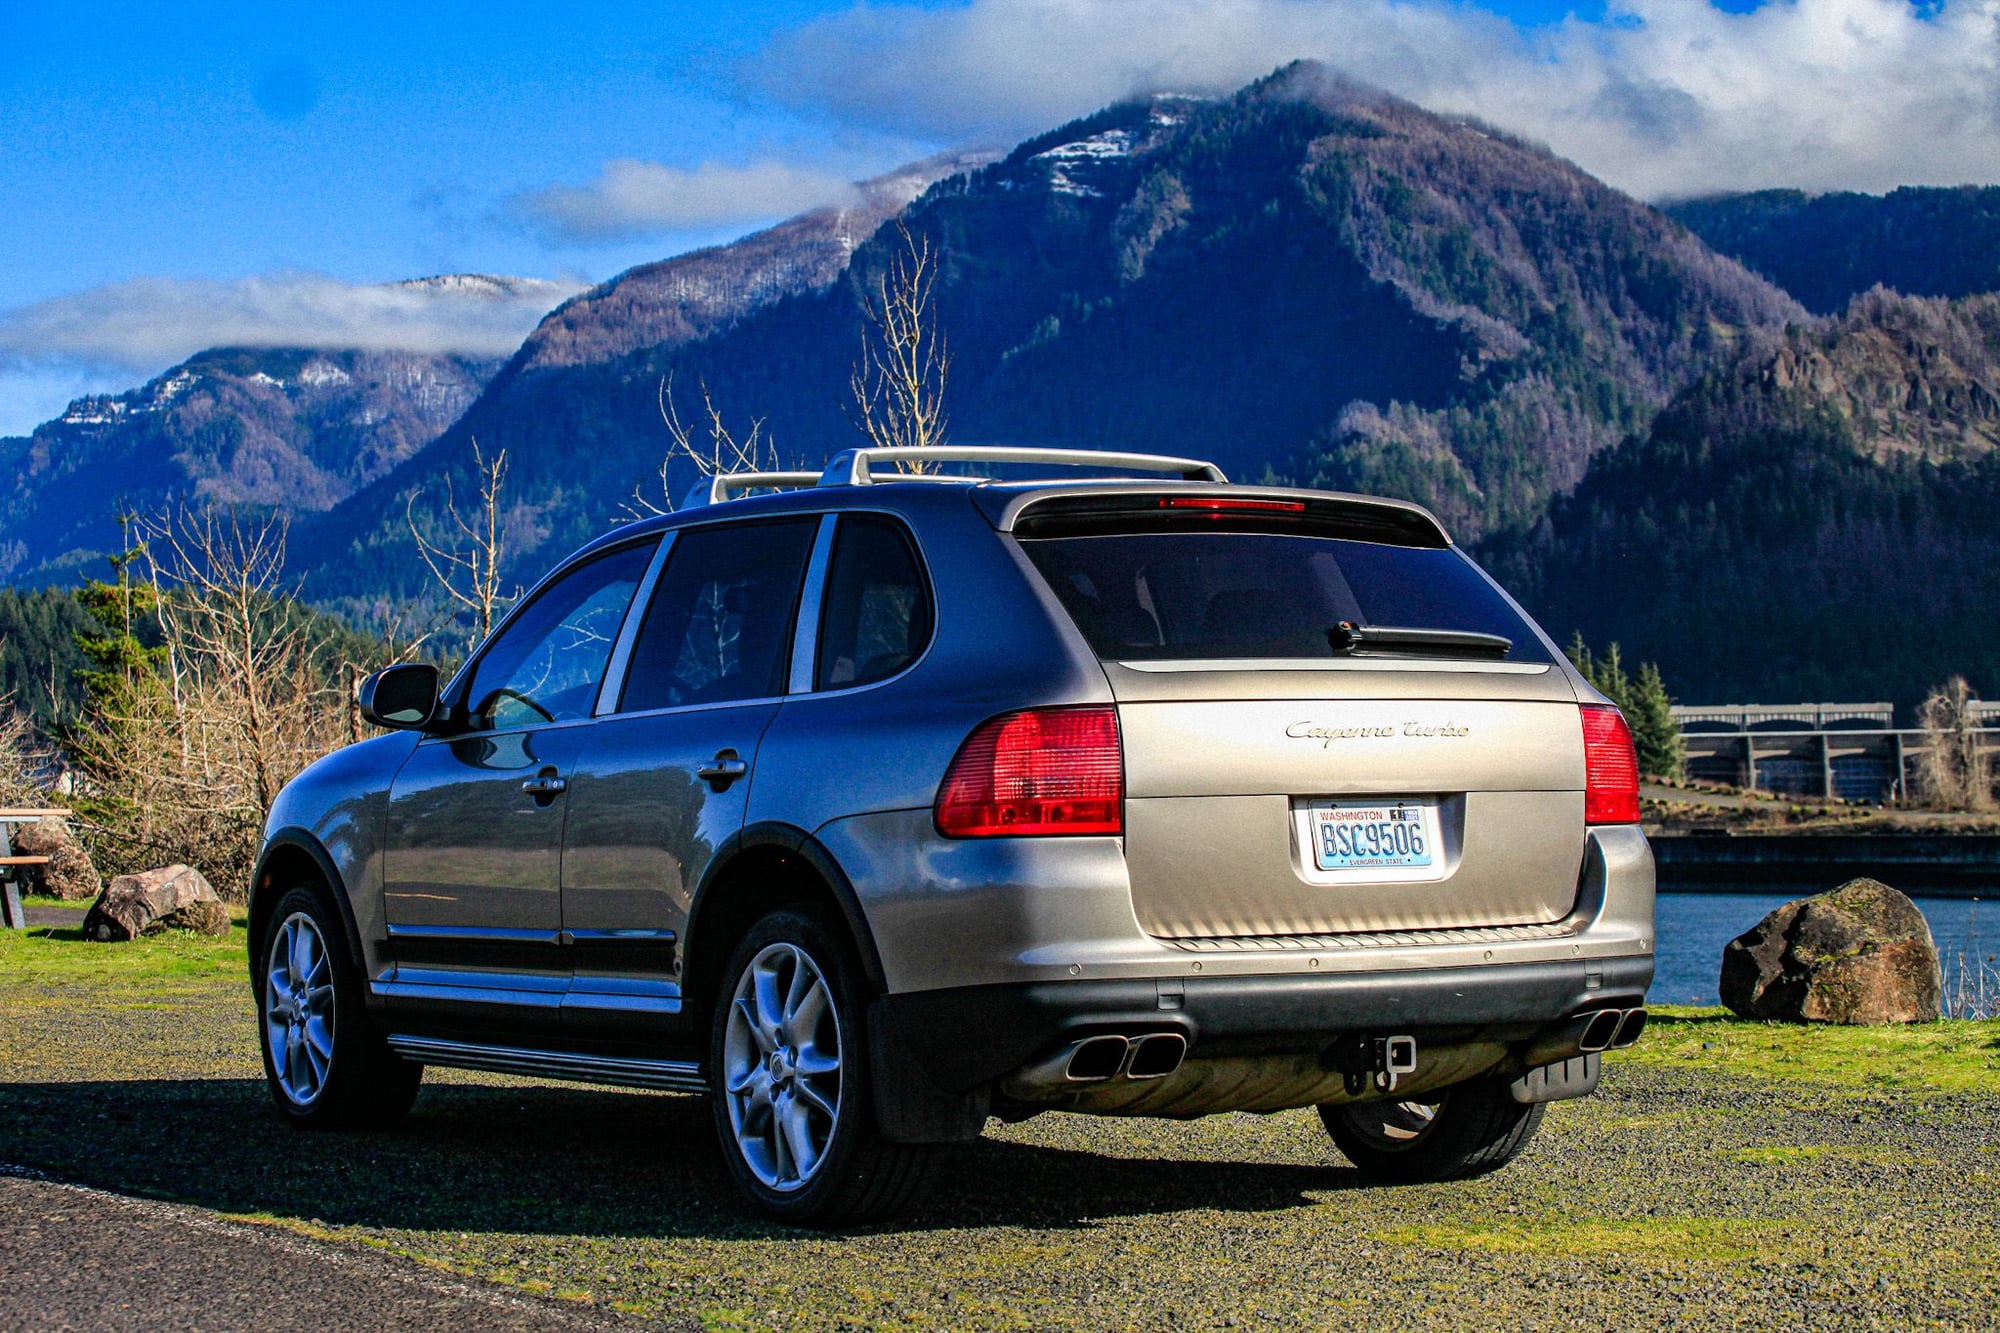 2004 Porsche Cayenne - '04 Cayenne Turbo, a few issues - Used - VIN WP1AC29P54LA92748 - 140,500 Miles - 8 cyl - 4WD - Automatic - SUV - Gold - Washougal, WA 98671, United States